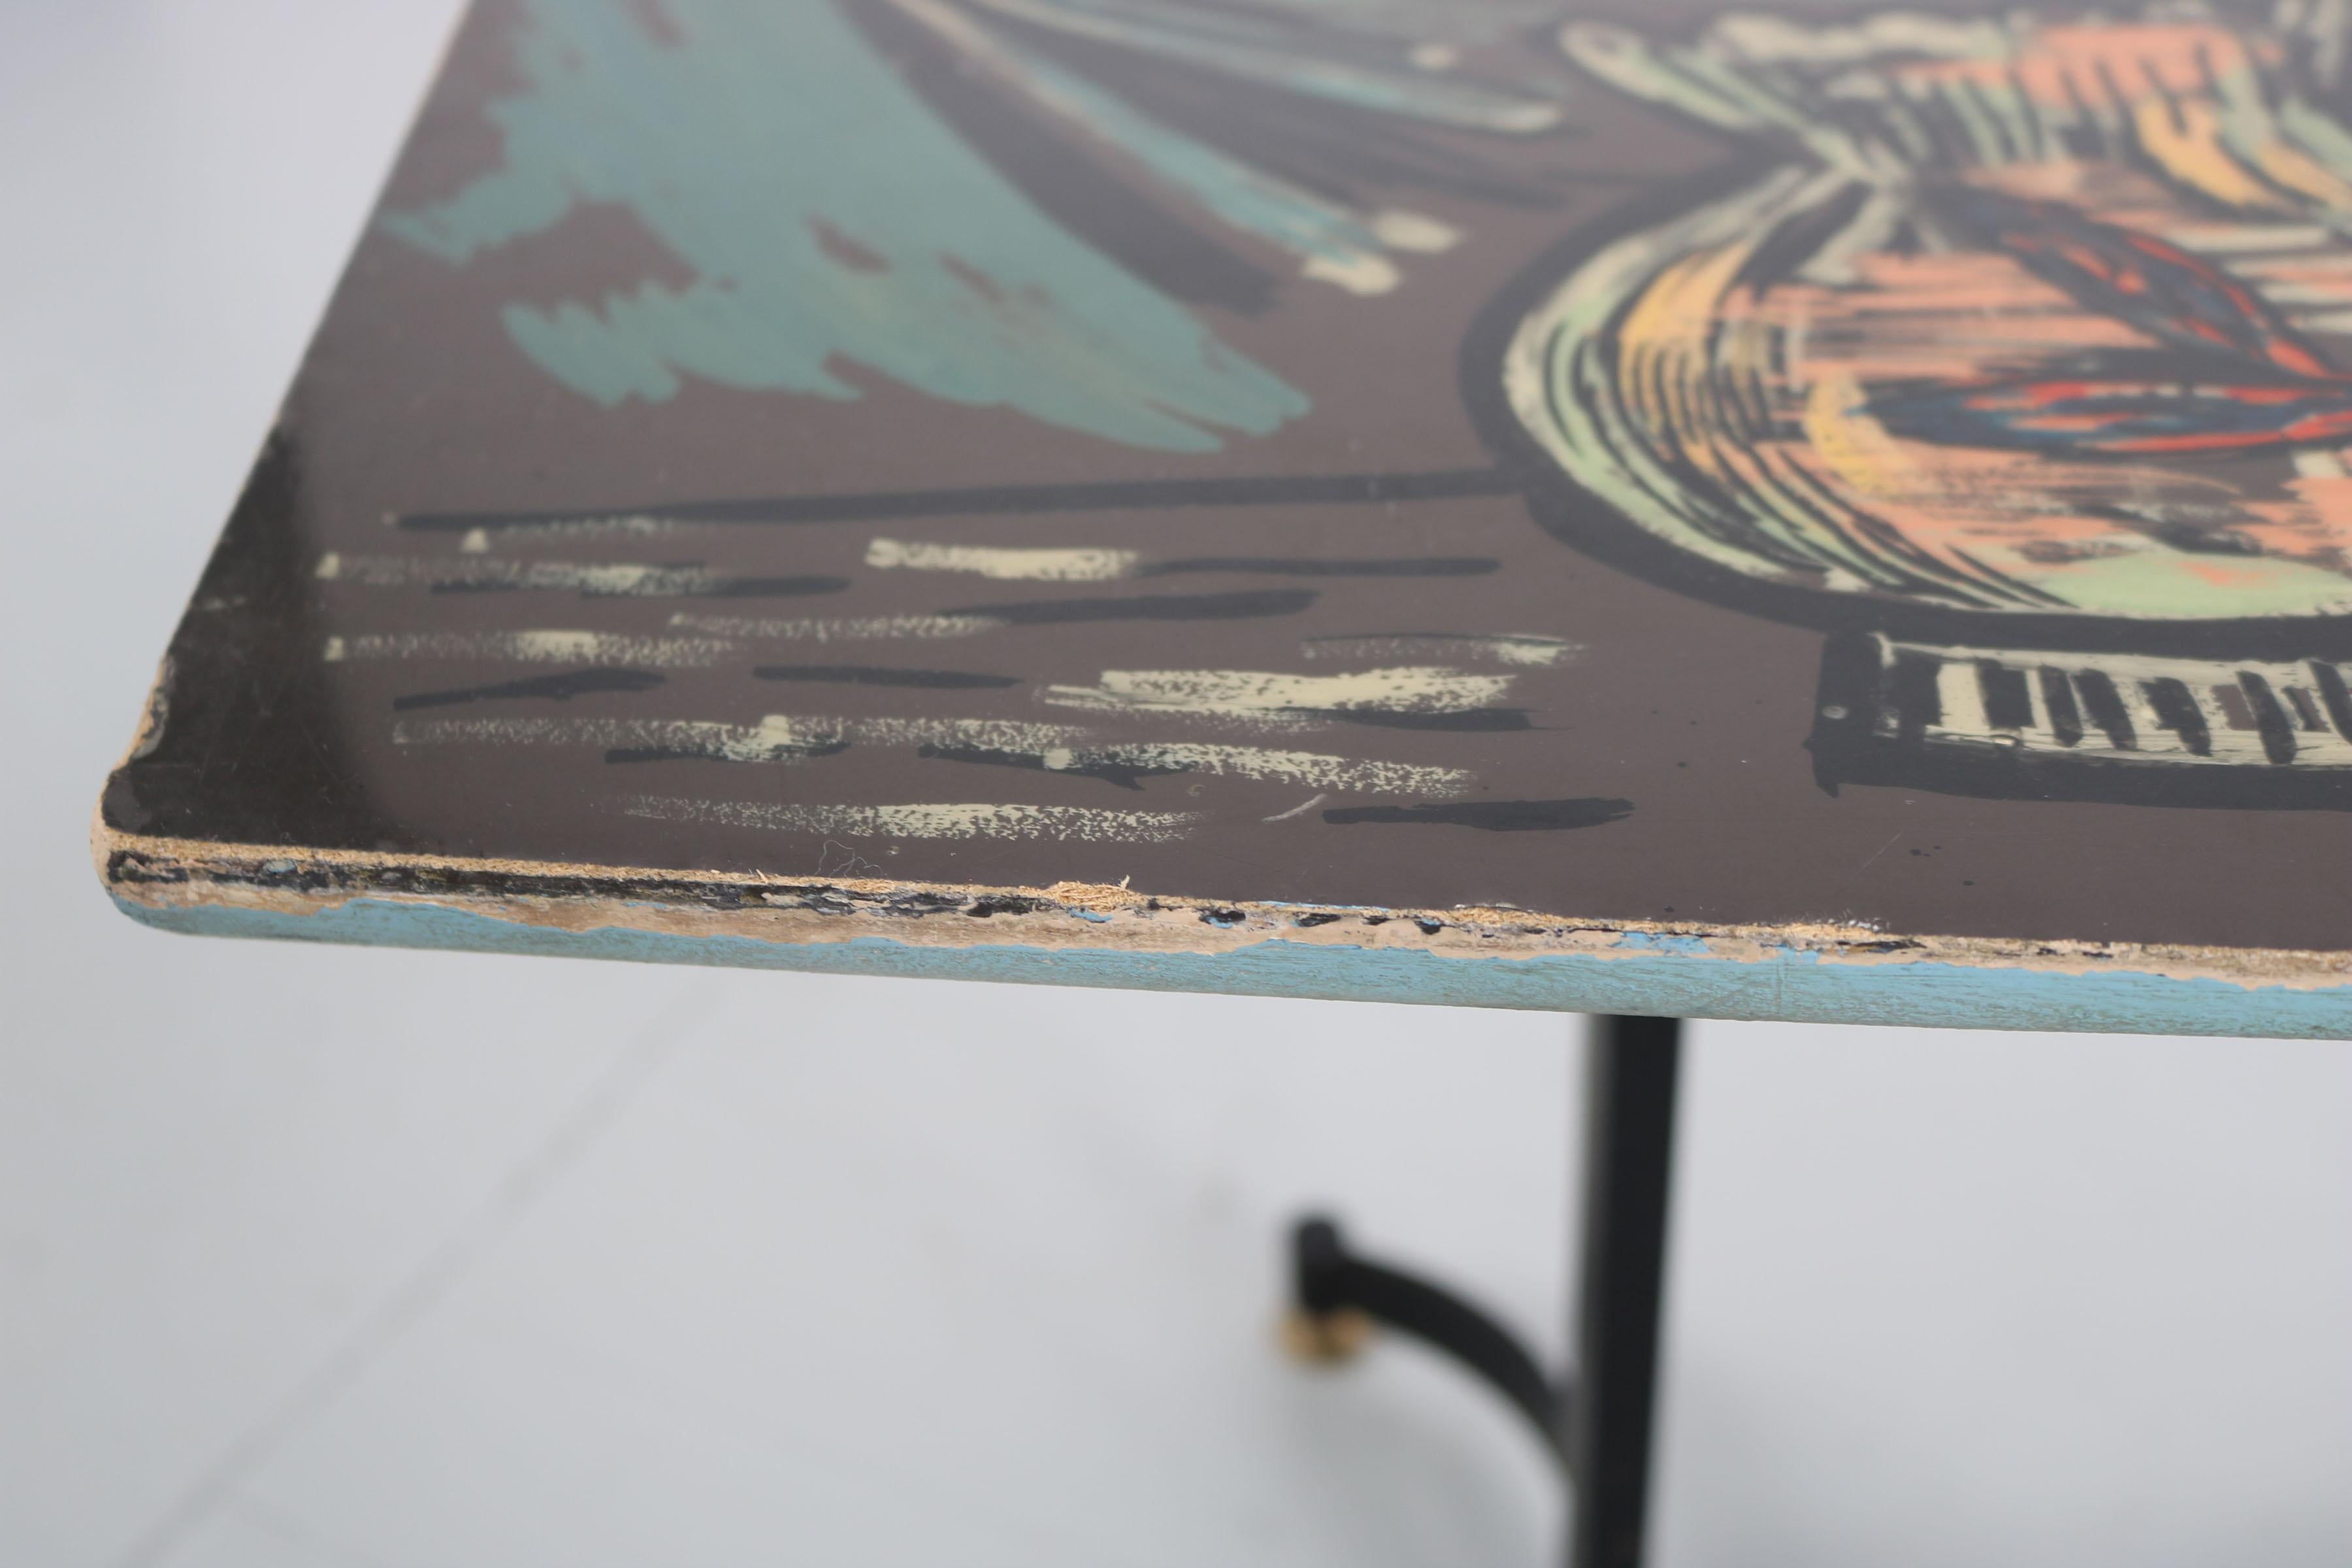 Italian Dark Sofa Table with Colorful Hand-Painted Motives on Table Top, 1950s For Sale 2